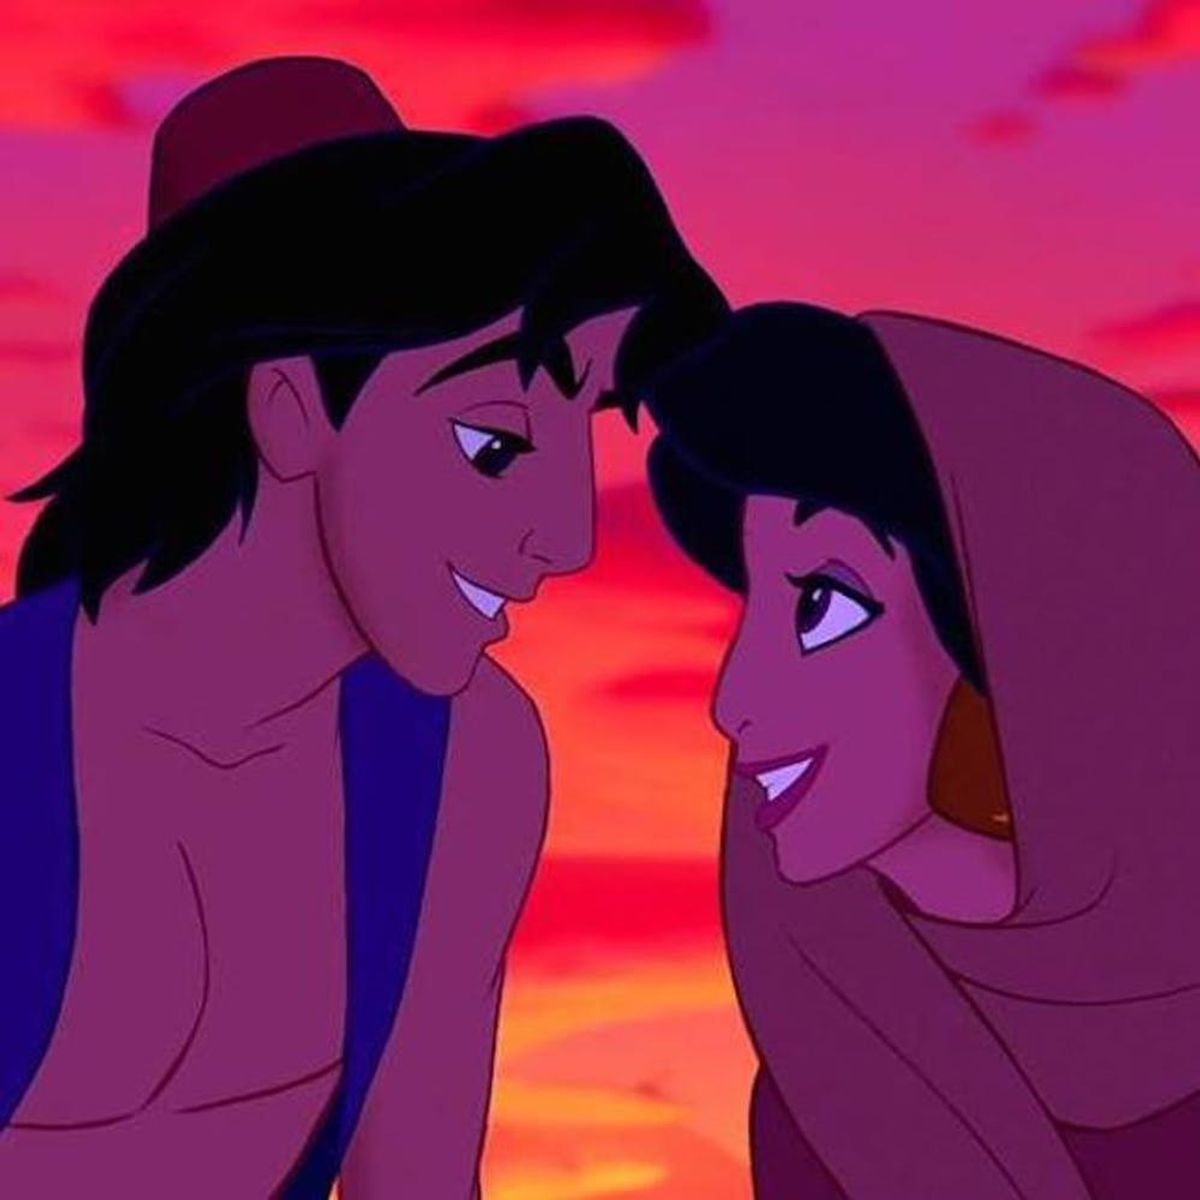 Whoa: You May Be Able to Score a Leading Role in Disney’s Live-Action Aladdin Remake